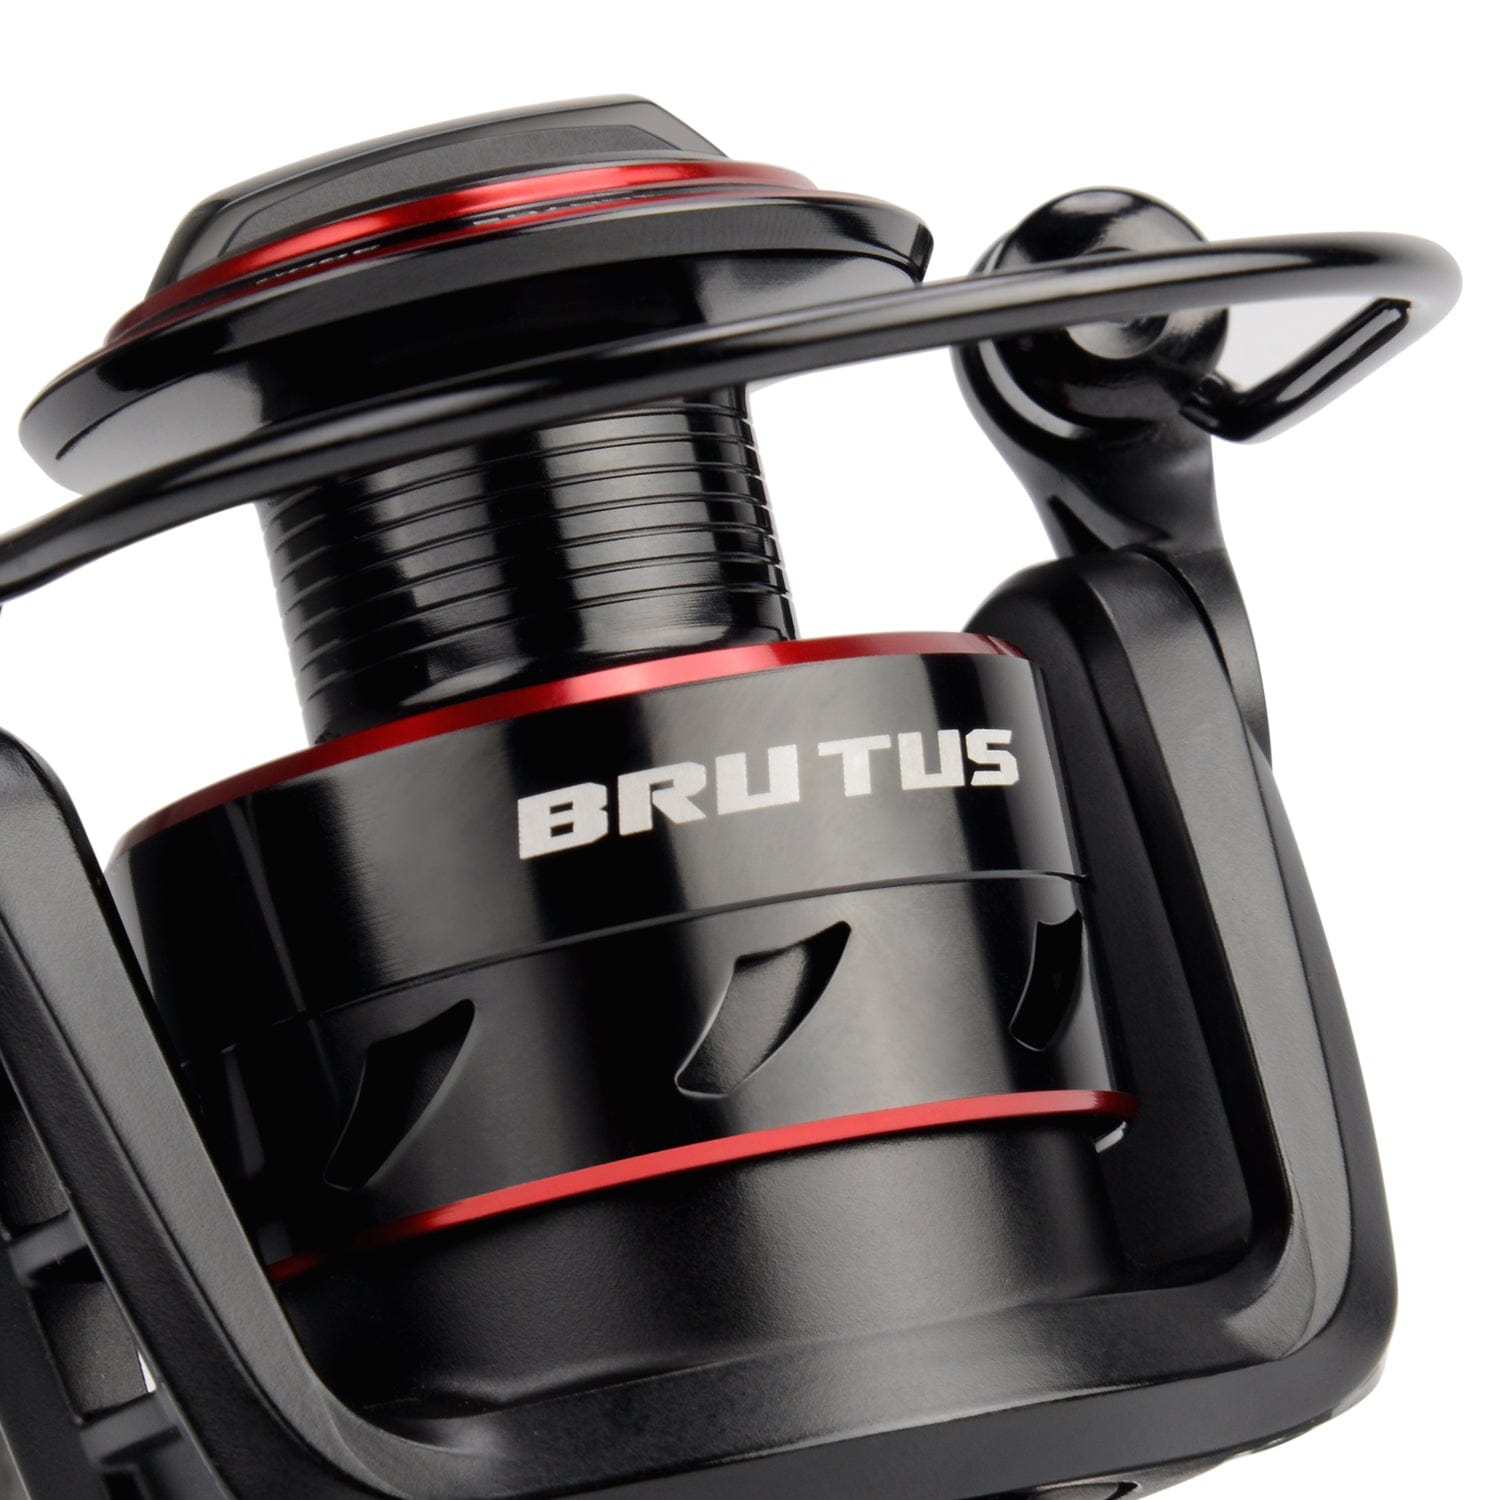 KastKing Brutus Spincast Fishing Reel, Easy to Use Push Button Casting Design, High Speed 4.0:1 Gear Ratio, 5 MaxiDur Ball Bearings